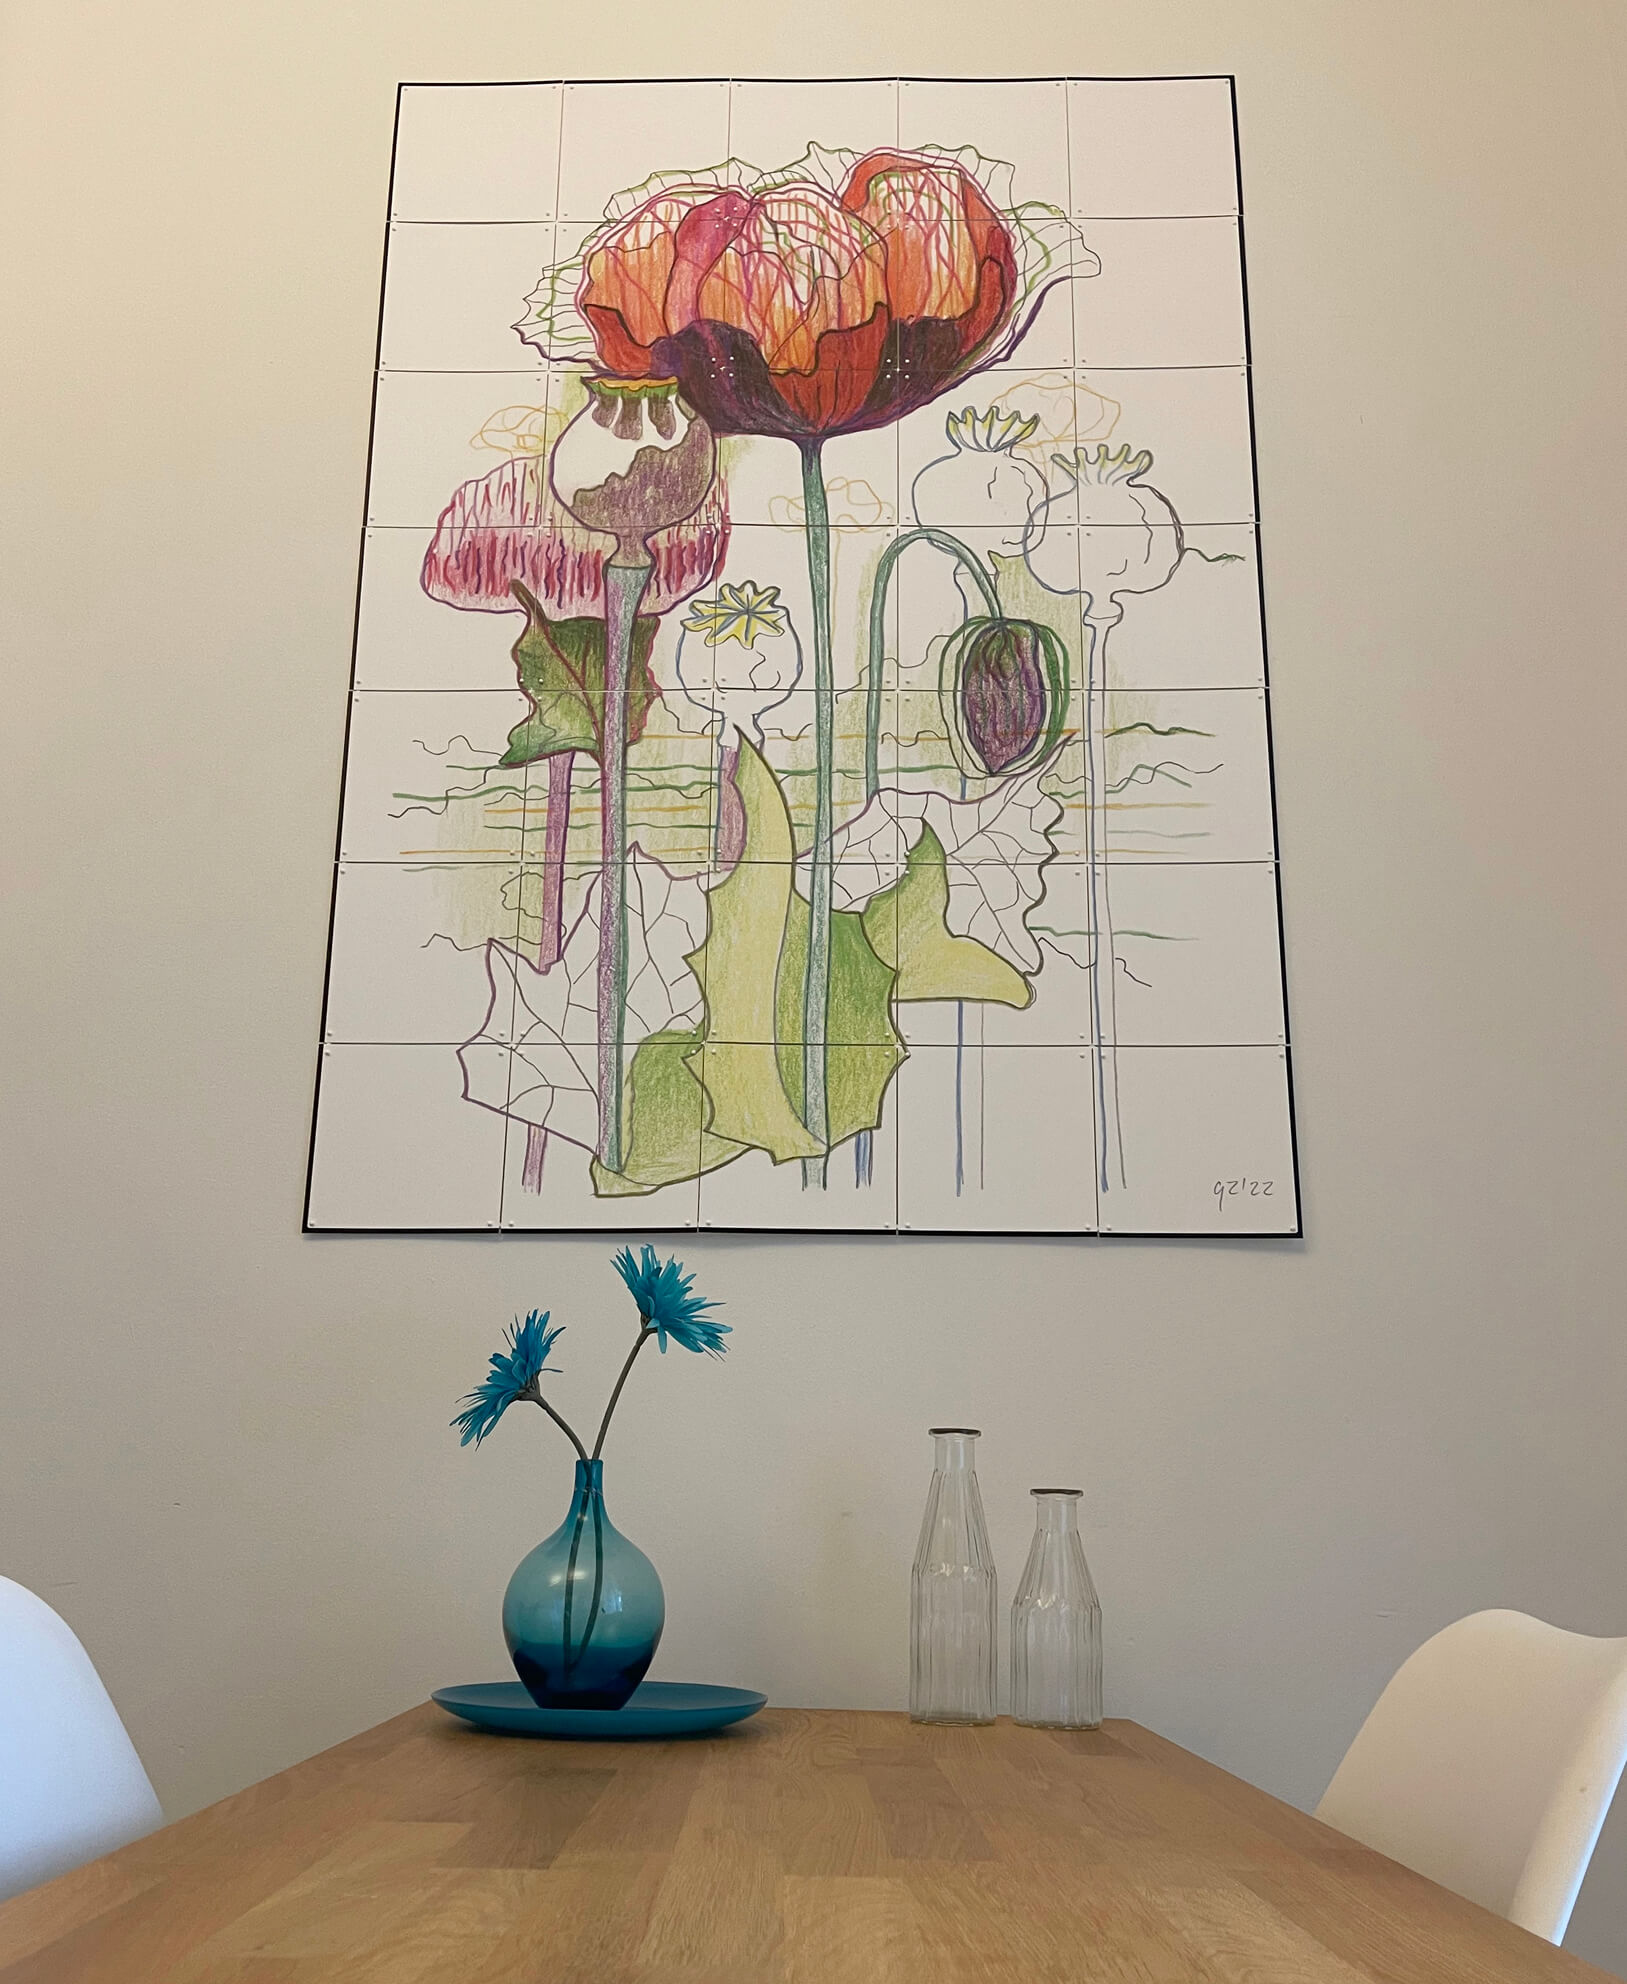 Papaver Poster affiche in the room